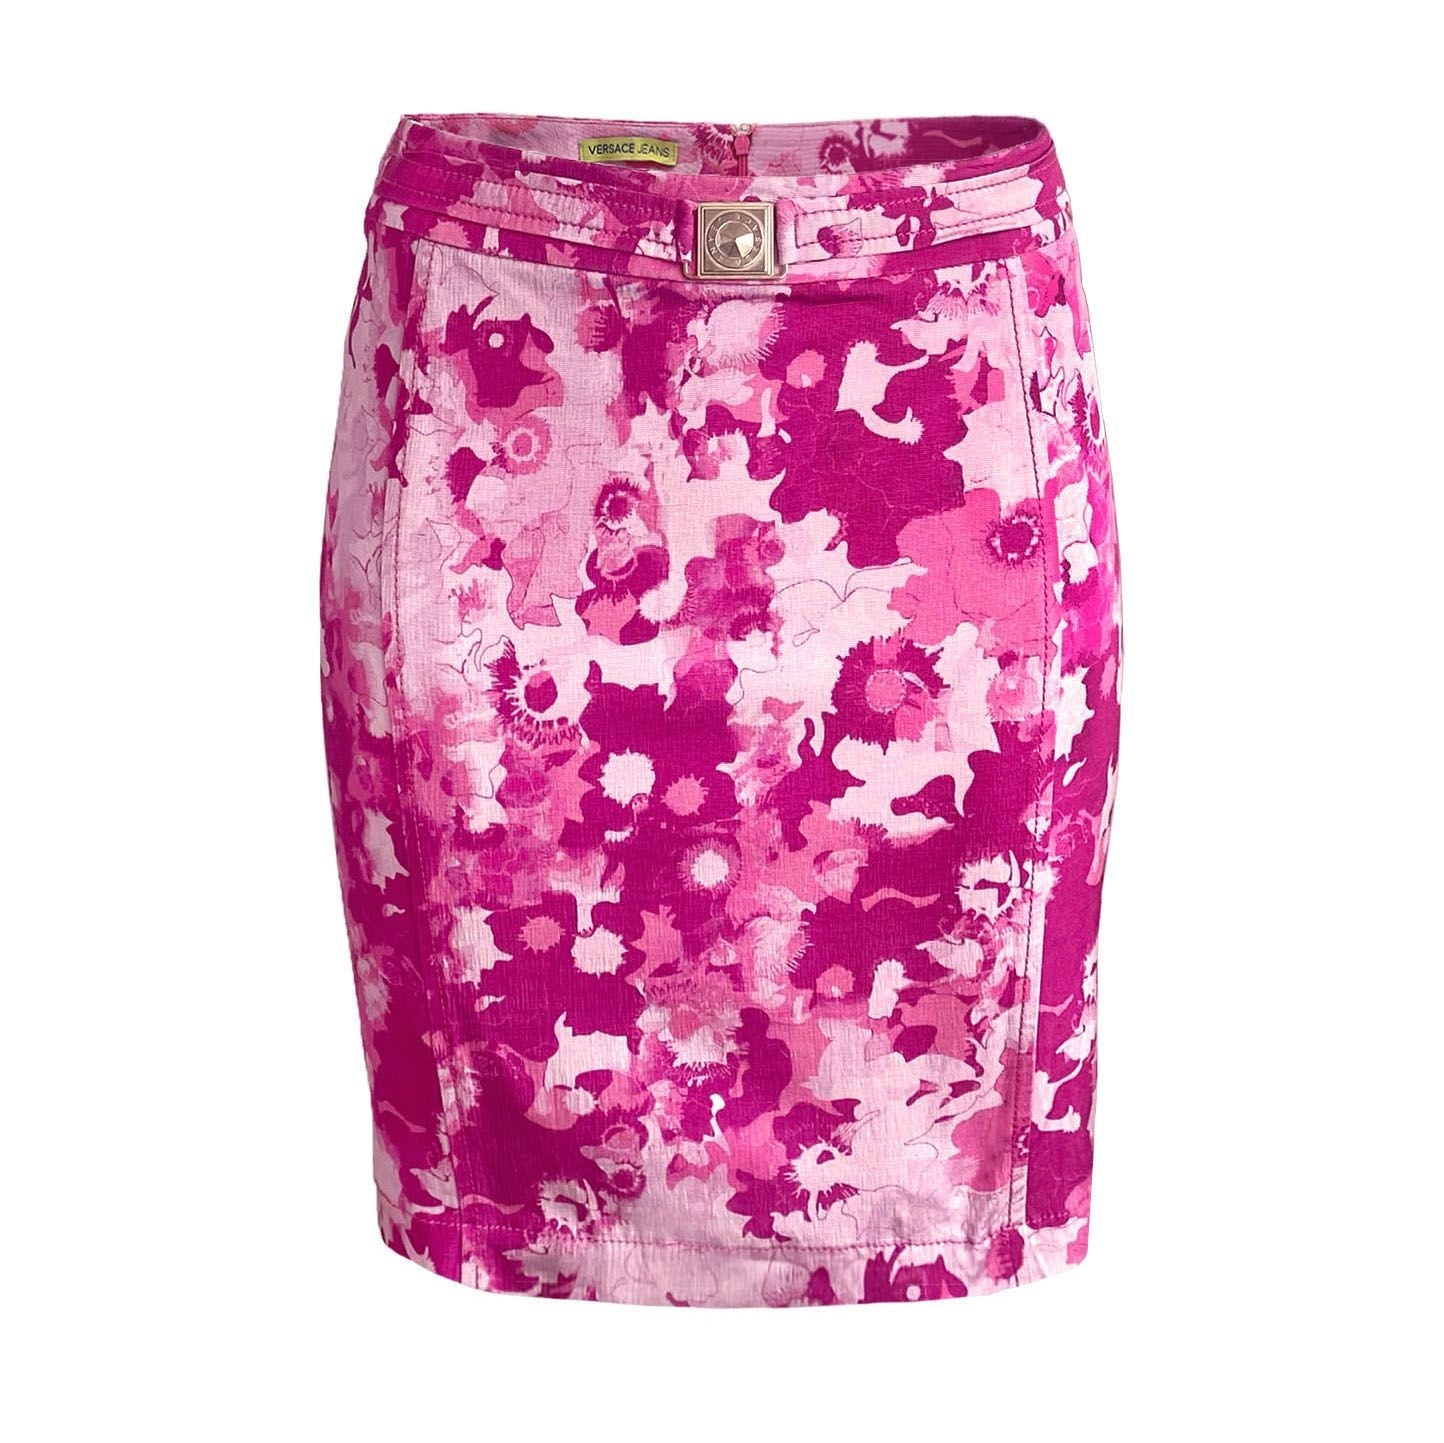 VERSACE JEANS PINK FLORAL SKIRT - 1